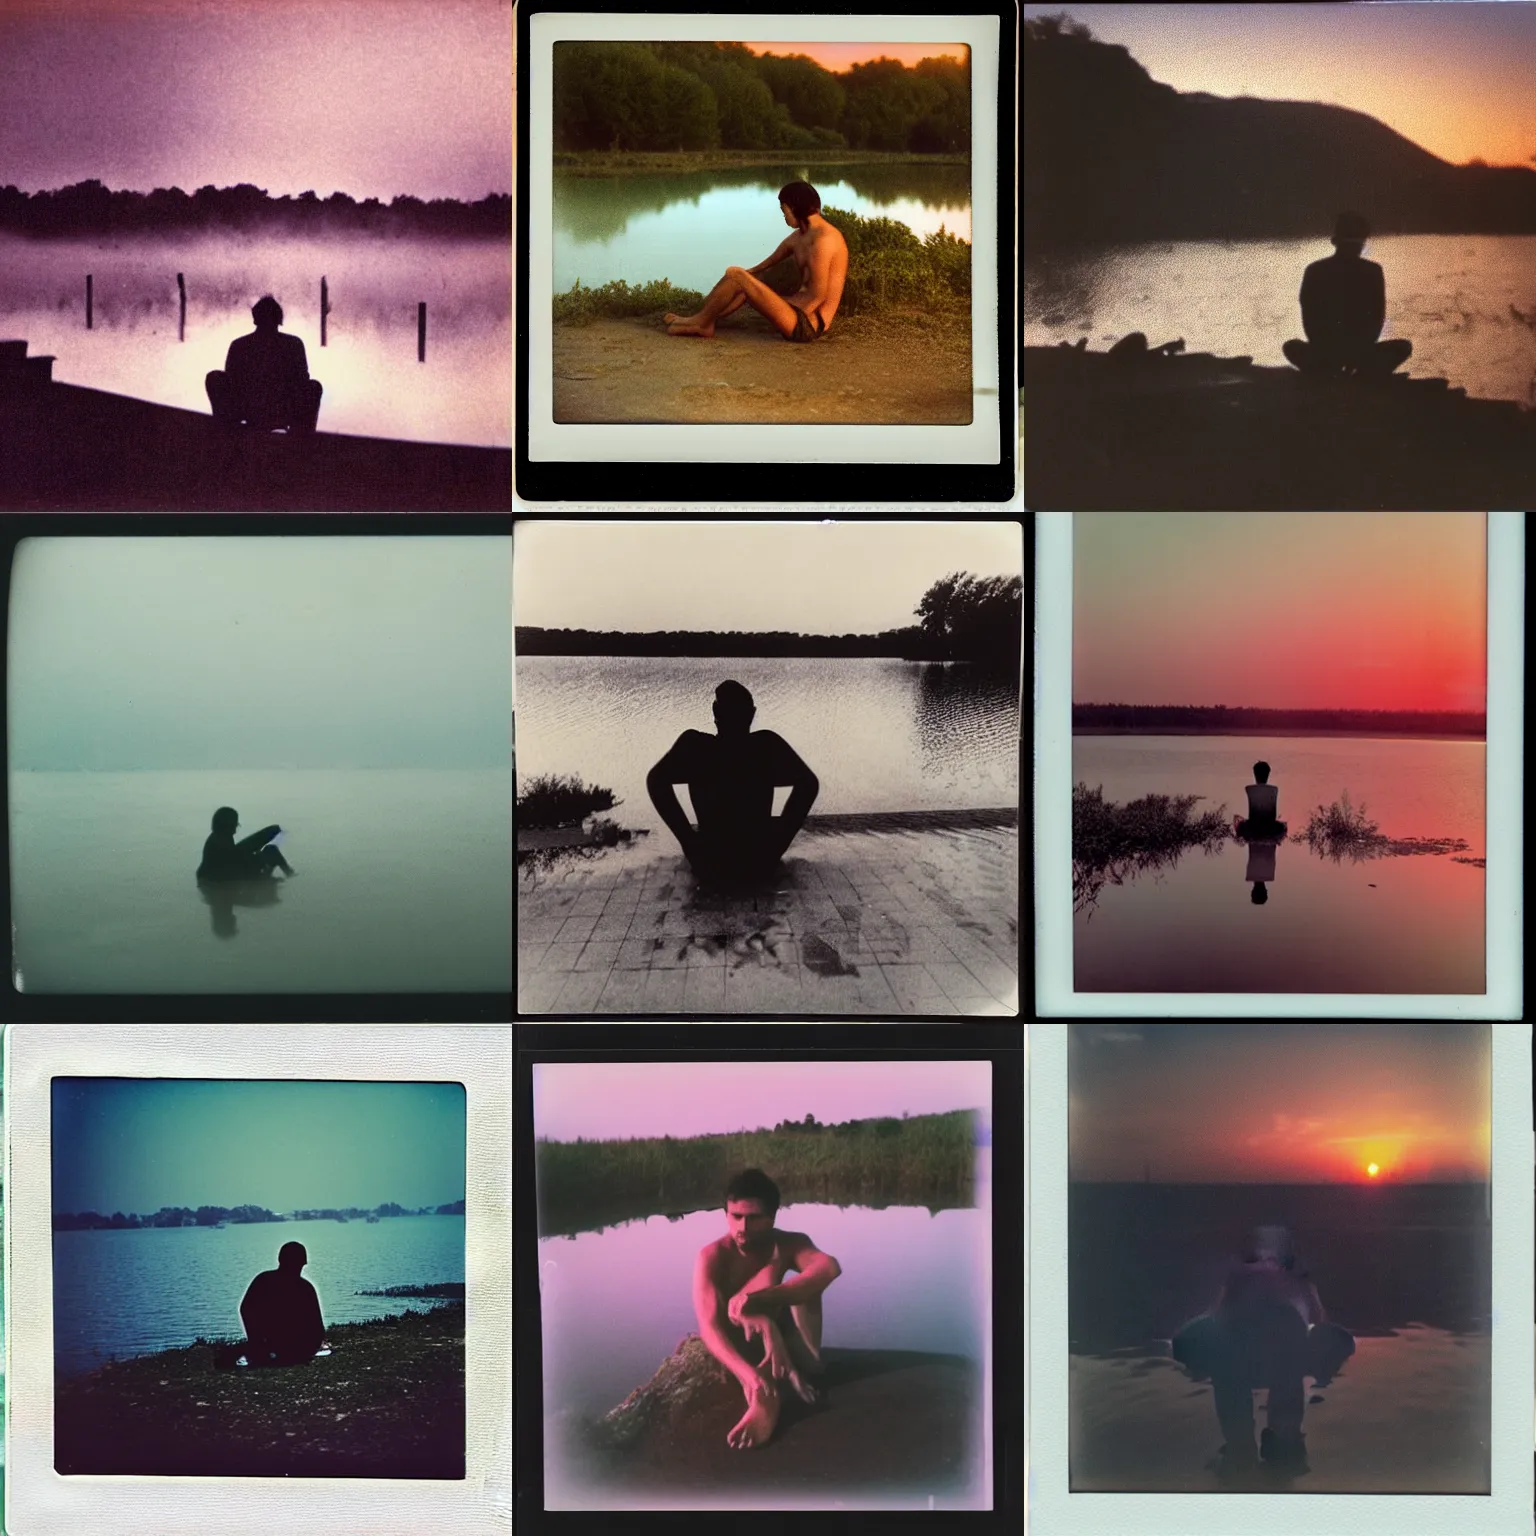 Prompt: extremely sad scene of a man sitting on the edge of a lagoon, mist, bloody sunset, polaroid photography from the 70s